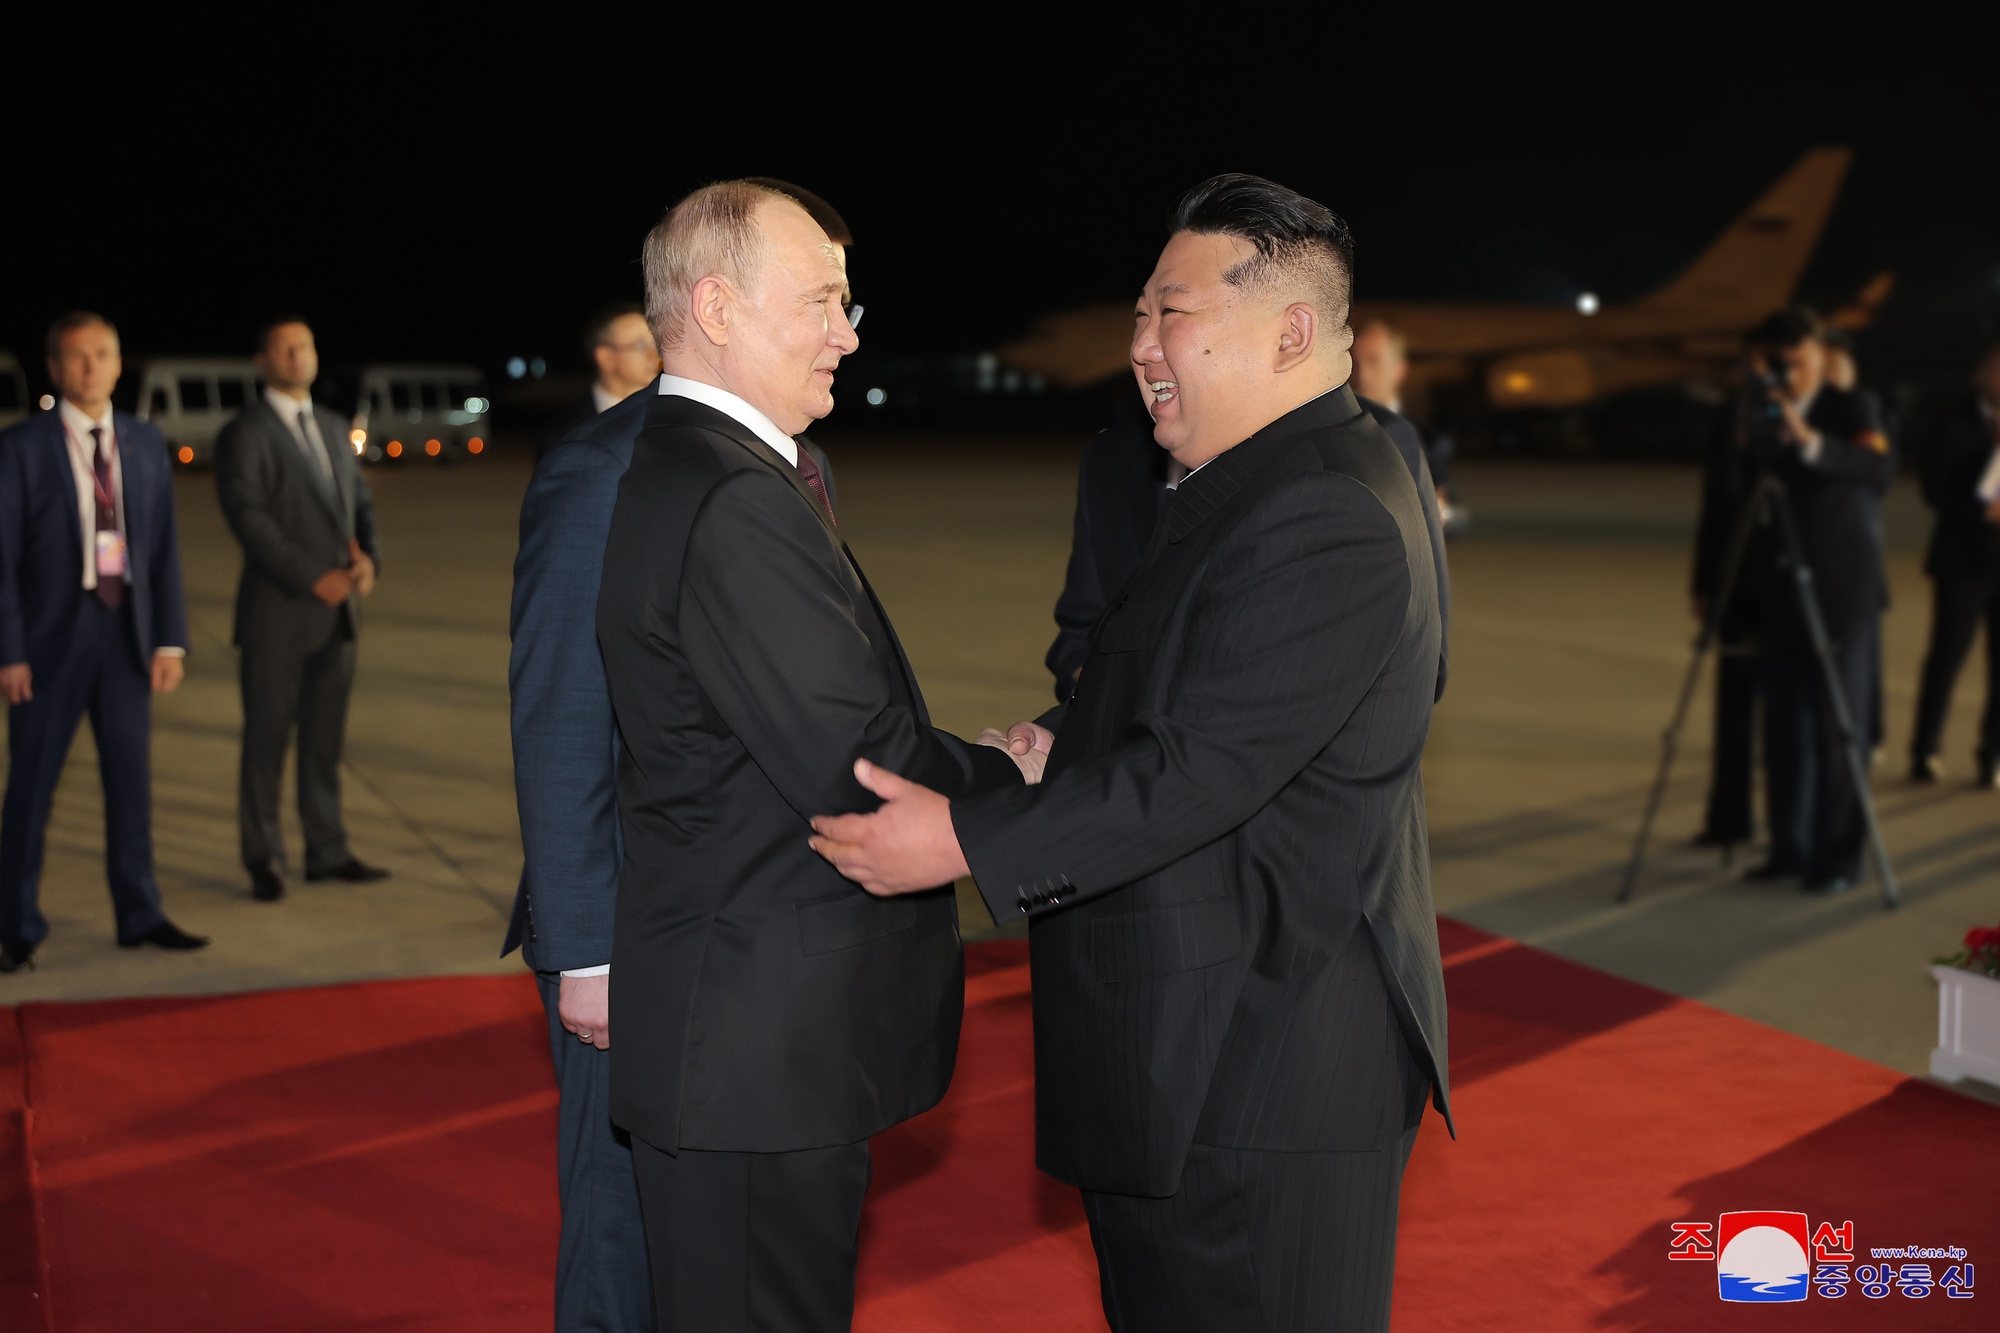 epa11421416 A photo released by the official North Korean Central News Agency (KCNA) shows Russian President Vladimir Putin (L) received by North Korean leader Kim Jong Un upon arrival at the airport of Pyongyang, North Korea, 18 June 2024 (issued 19 June 2024). The Russian president is on a state visit to North Korea from 18-19 June at the invitation of the North Korean leader. He last visited North Korea in 2000, shortly after his first inauguration as president.  EPA/KCNA   EDITORIAL USE ONLY  EDITORIAL USE ONLY